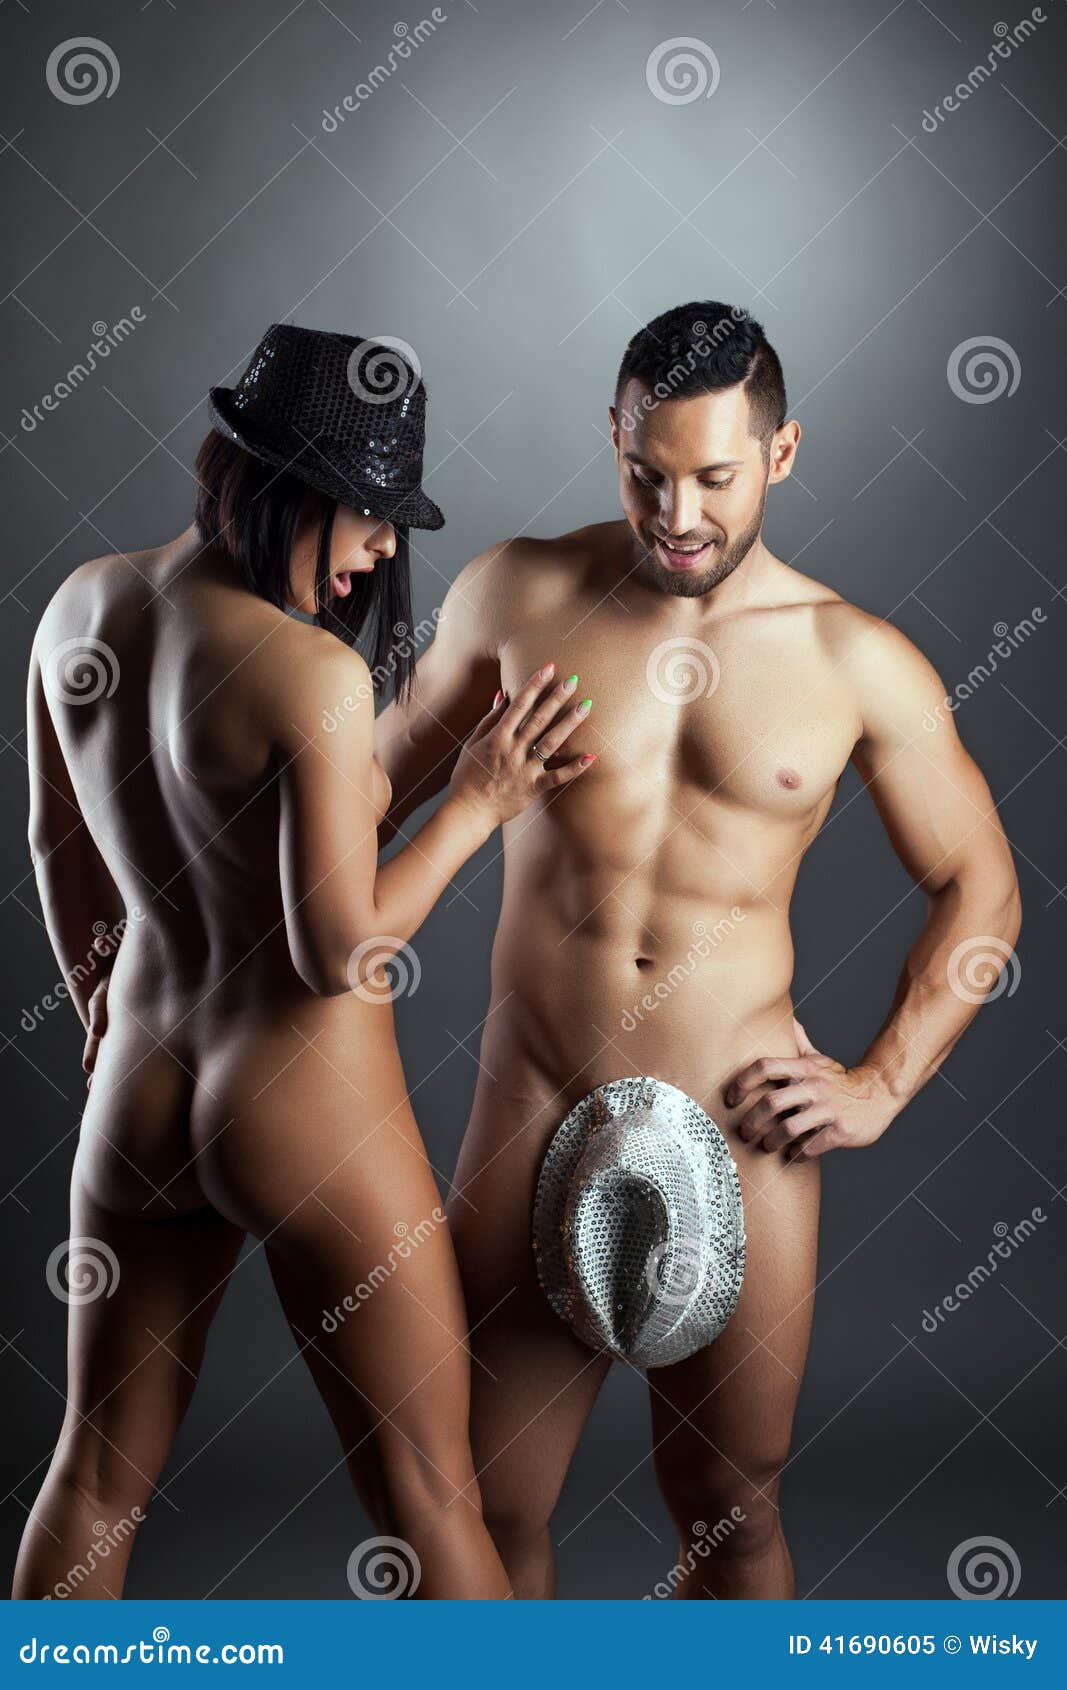 Surprised Nude Woman Looking At Man Dressed In Hat Stock